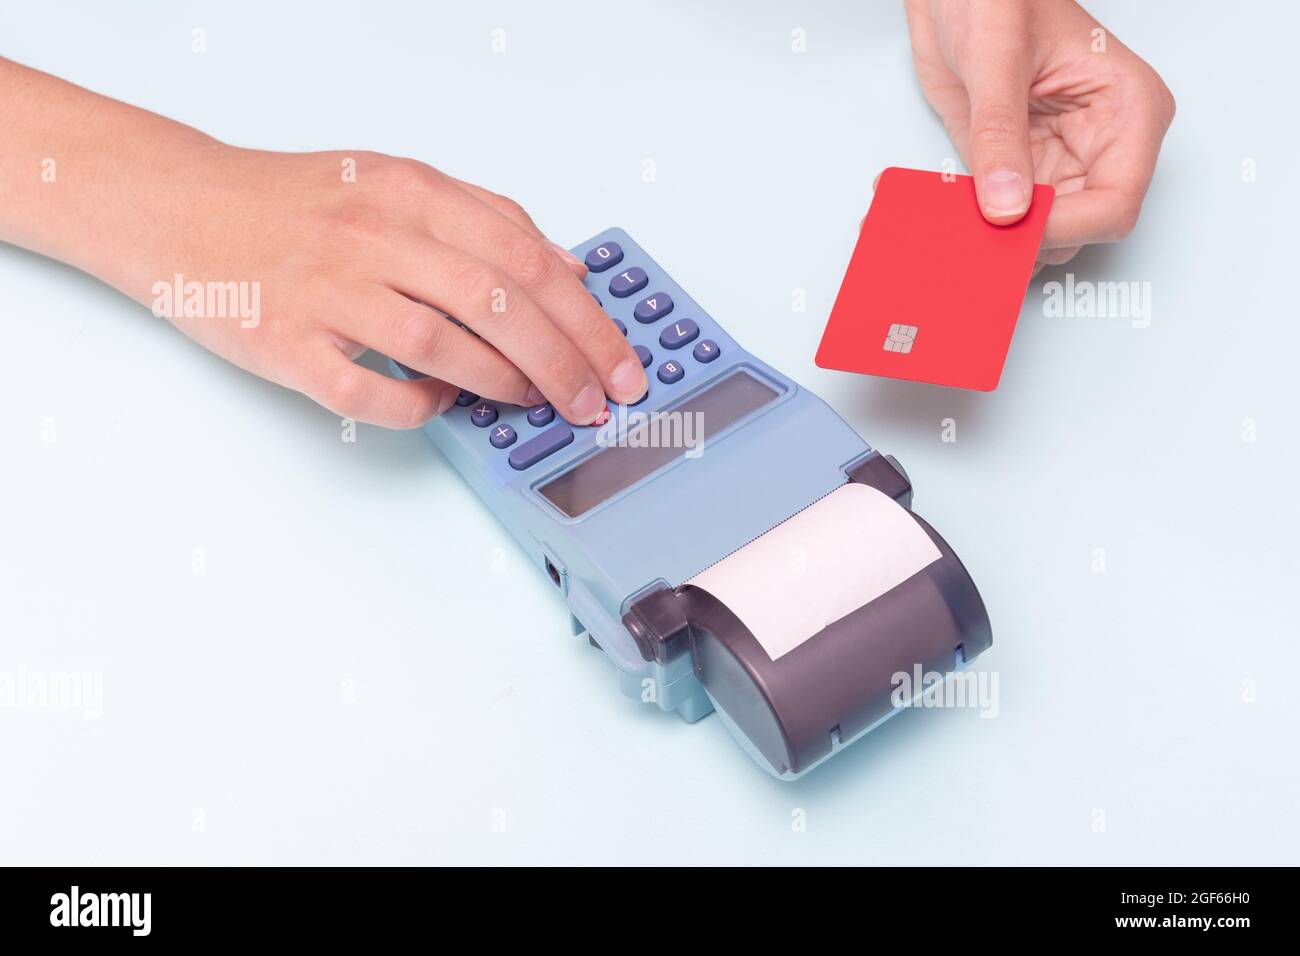 Payment for purchases by credit card. Close-up of a hand holding a bank card and a hand holding a check, receipt on a cash register on a blue backgrou Stock Photo